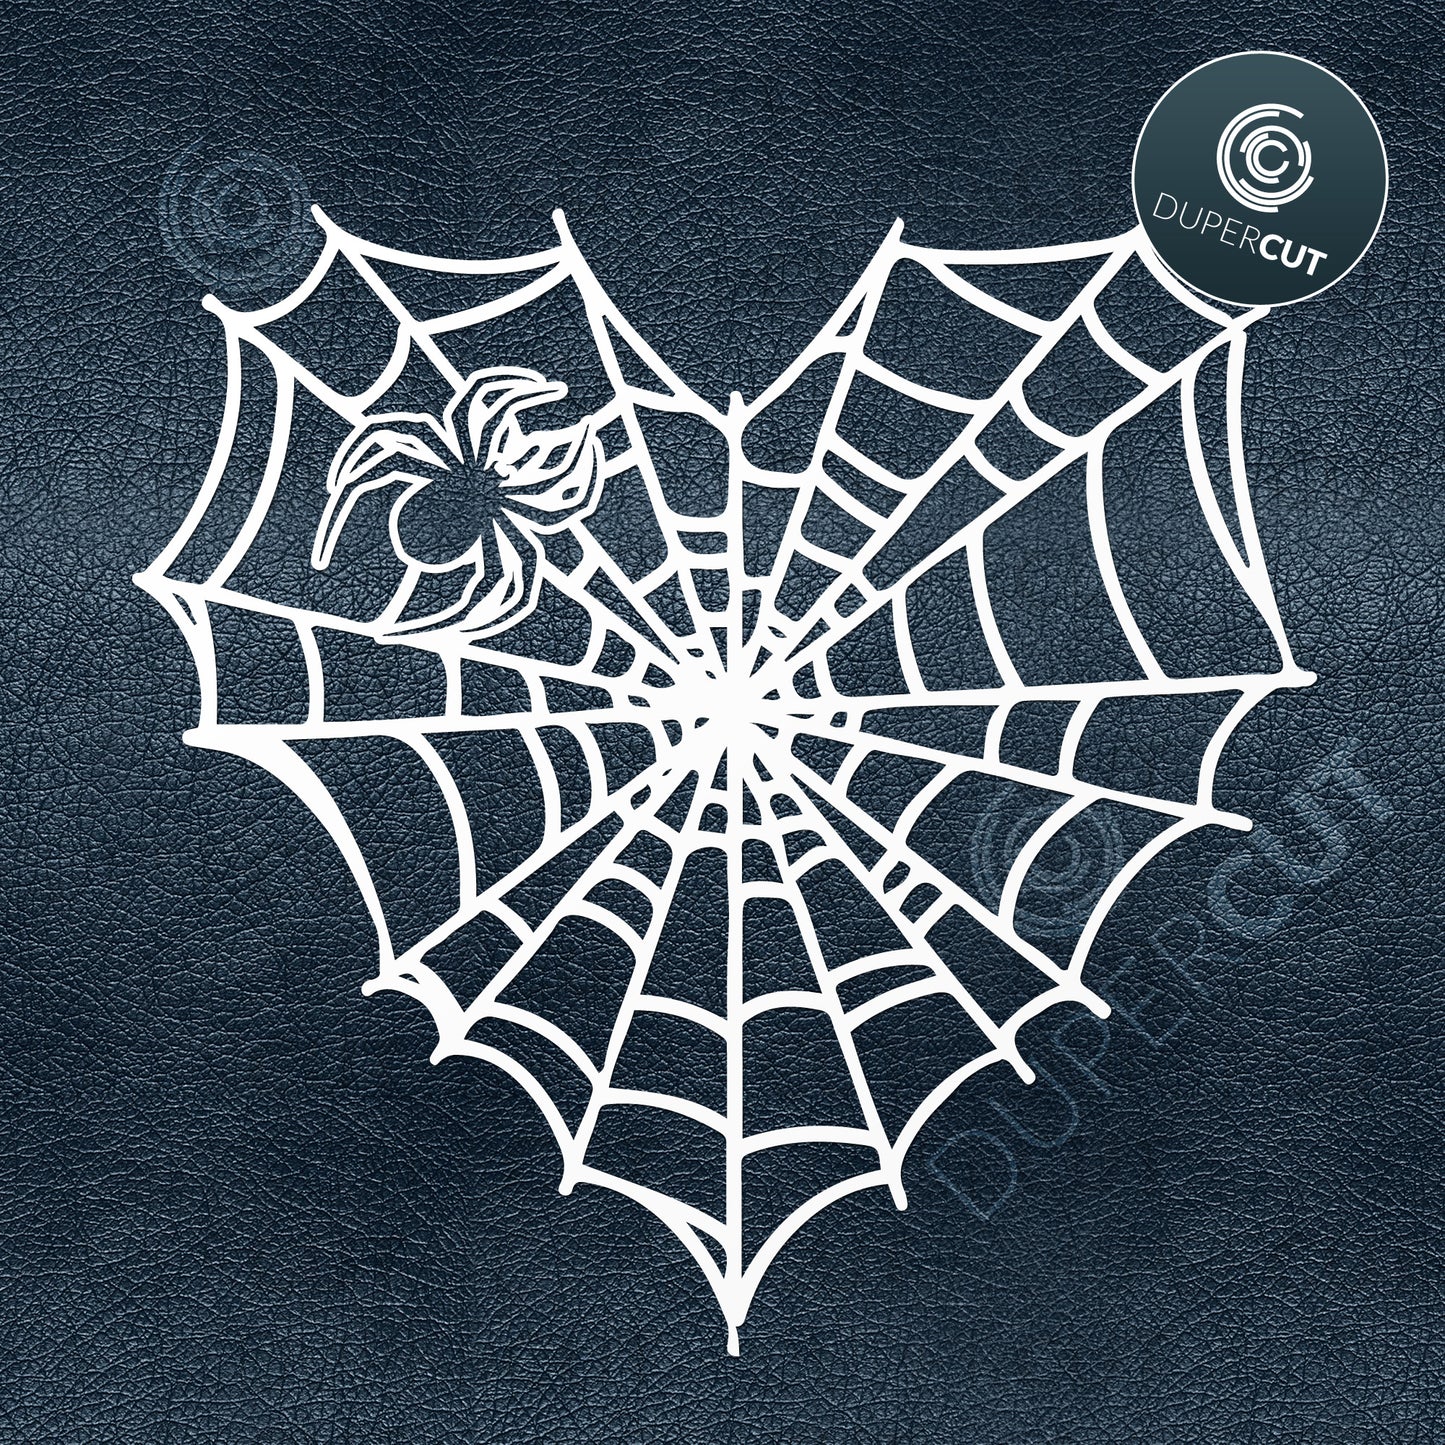 Spider web in shape of heart, cutting template - SVG DXF PNG files for Cricut, Glowforge, Silhouette Cameo, CNC Machines